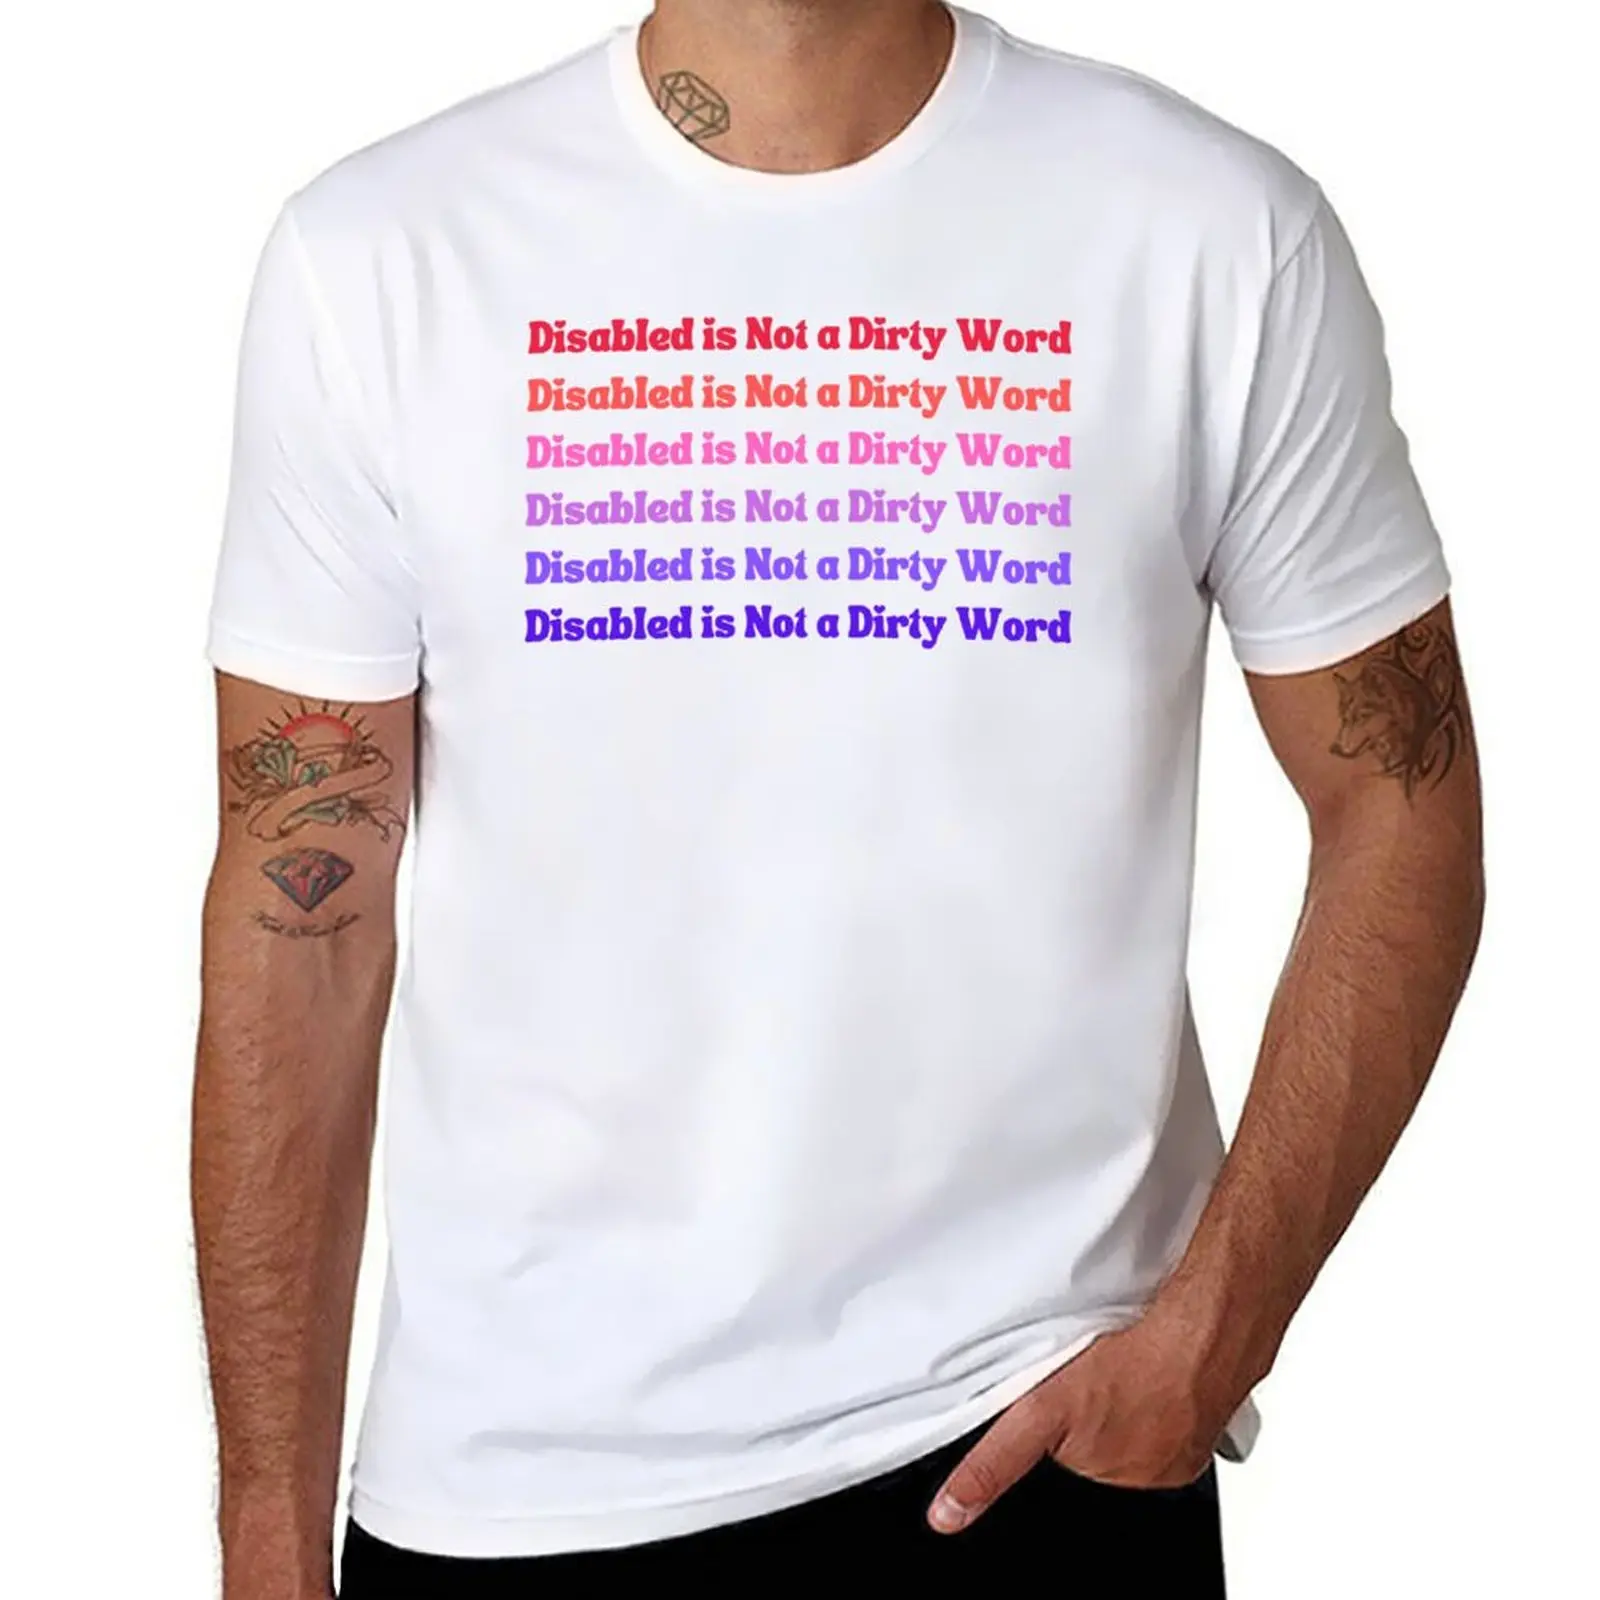 

New Disabled is not a dirty word T-Shirt vintage t shirt funny t shirts quick drying shirt new edition t shirt tshirts for men